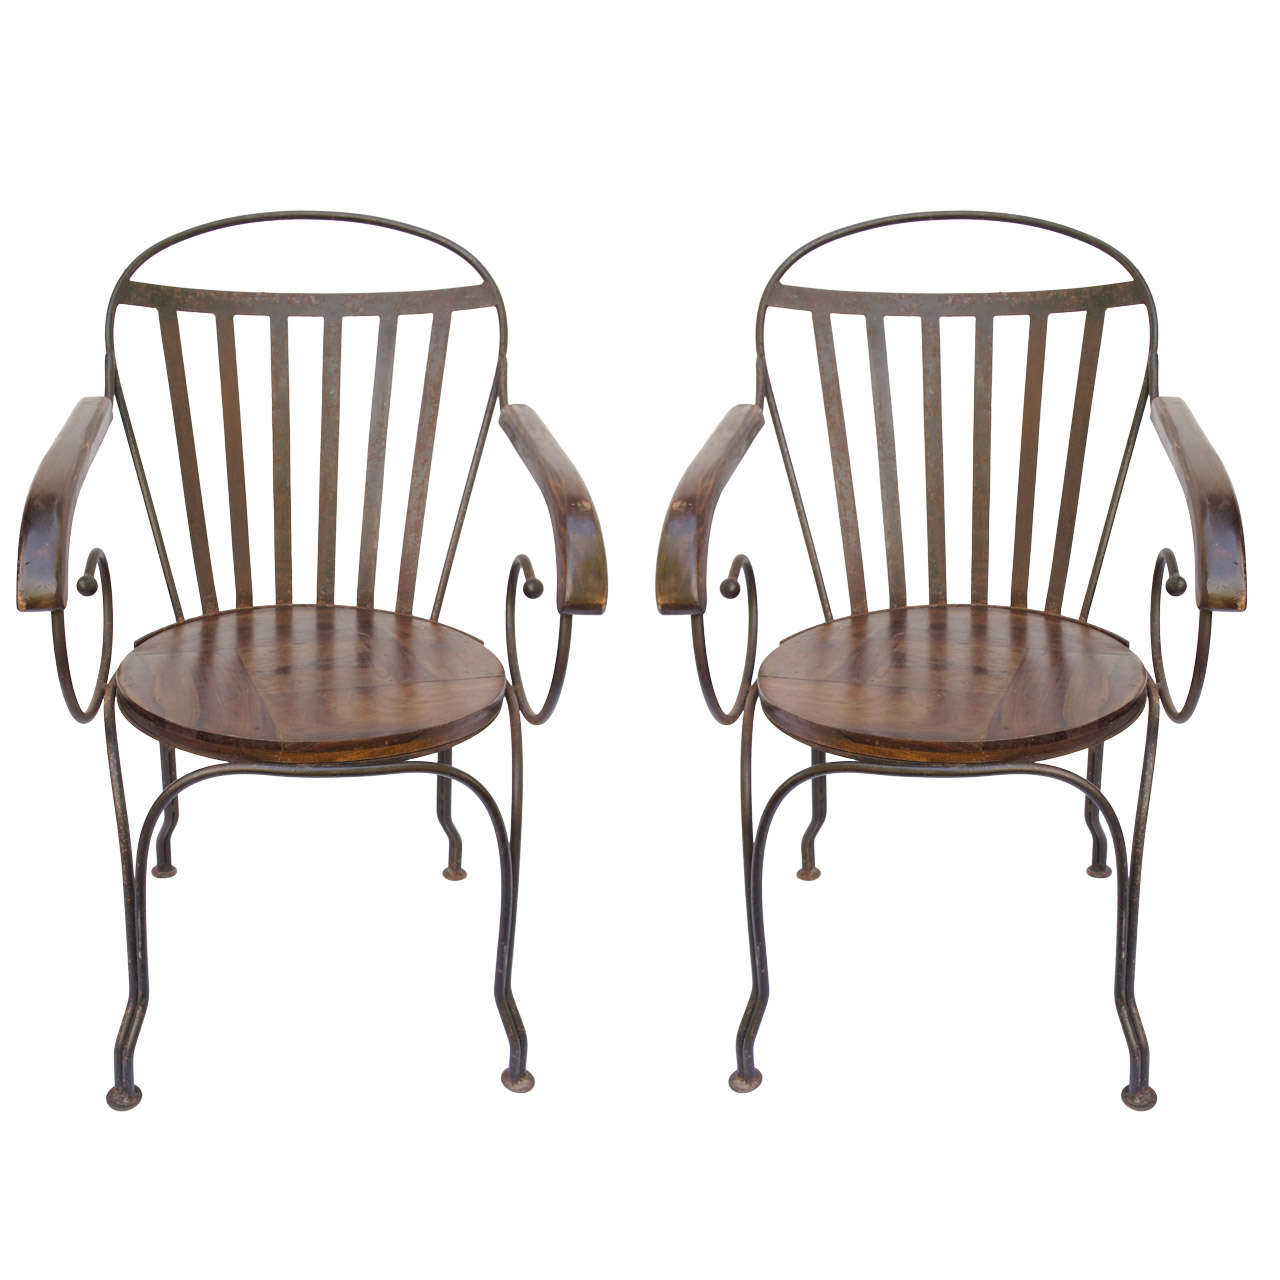 Great pair of antique iron arm chairs For Sale